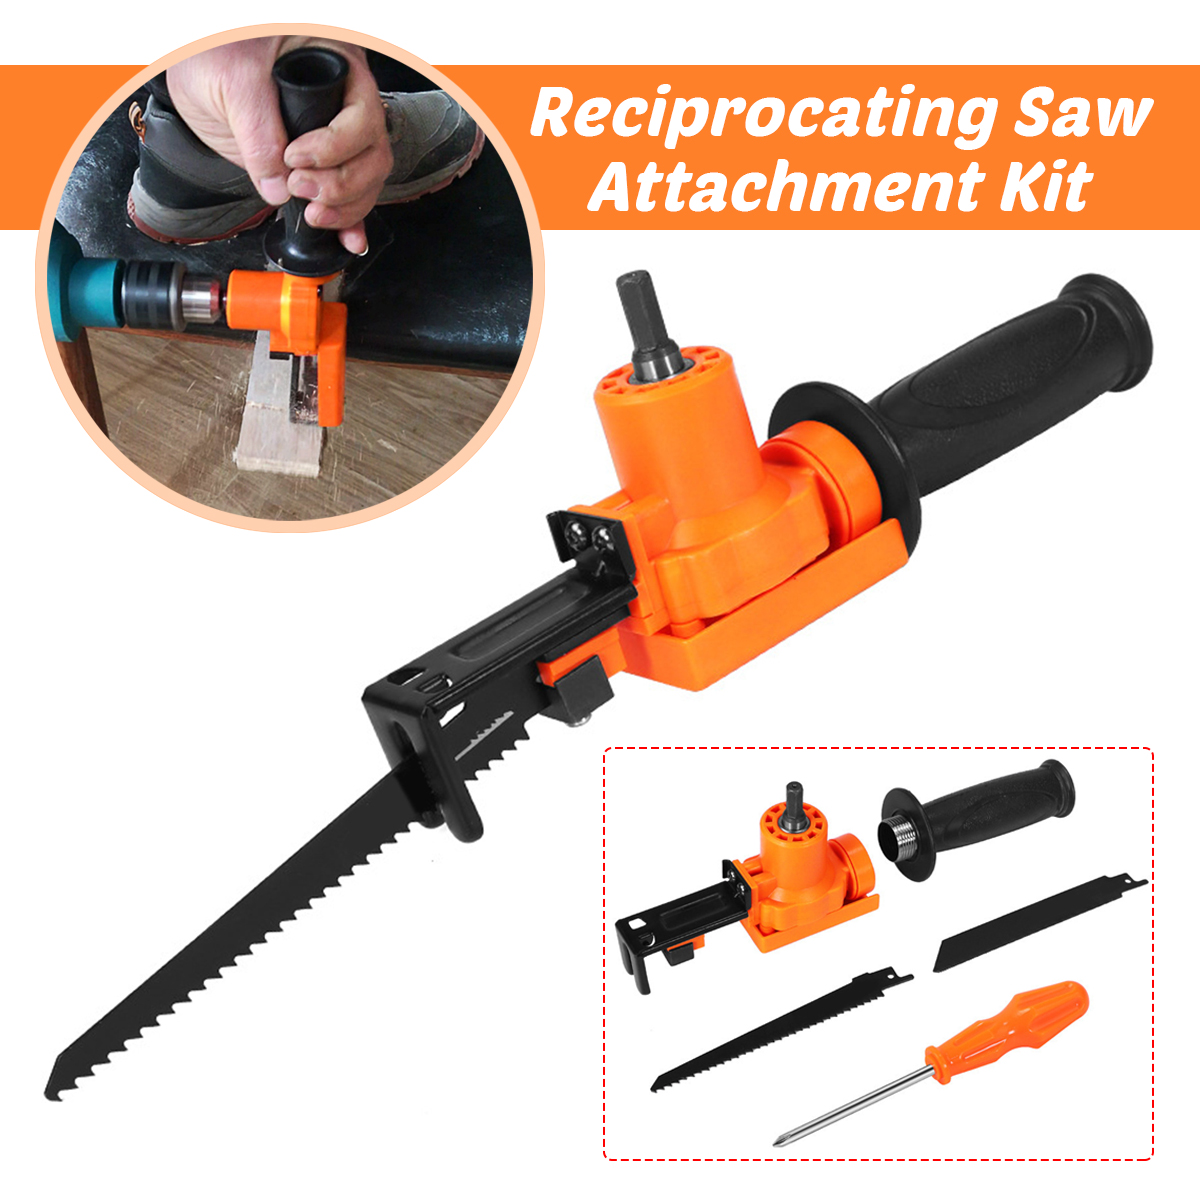 Reciprocating-Saw-Attachment-Adapter-Change-Electric-Drill-Into-Reciprocating-Saw-for-Wood-Metal-Cut-1725363-1